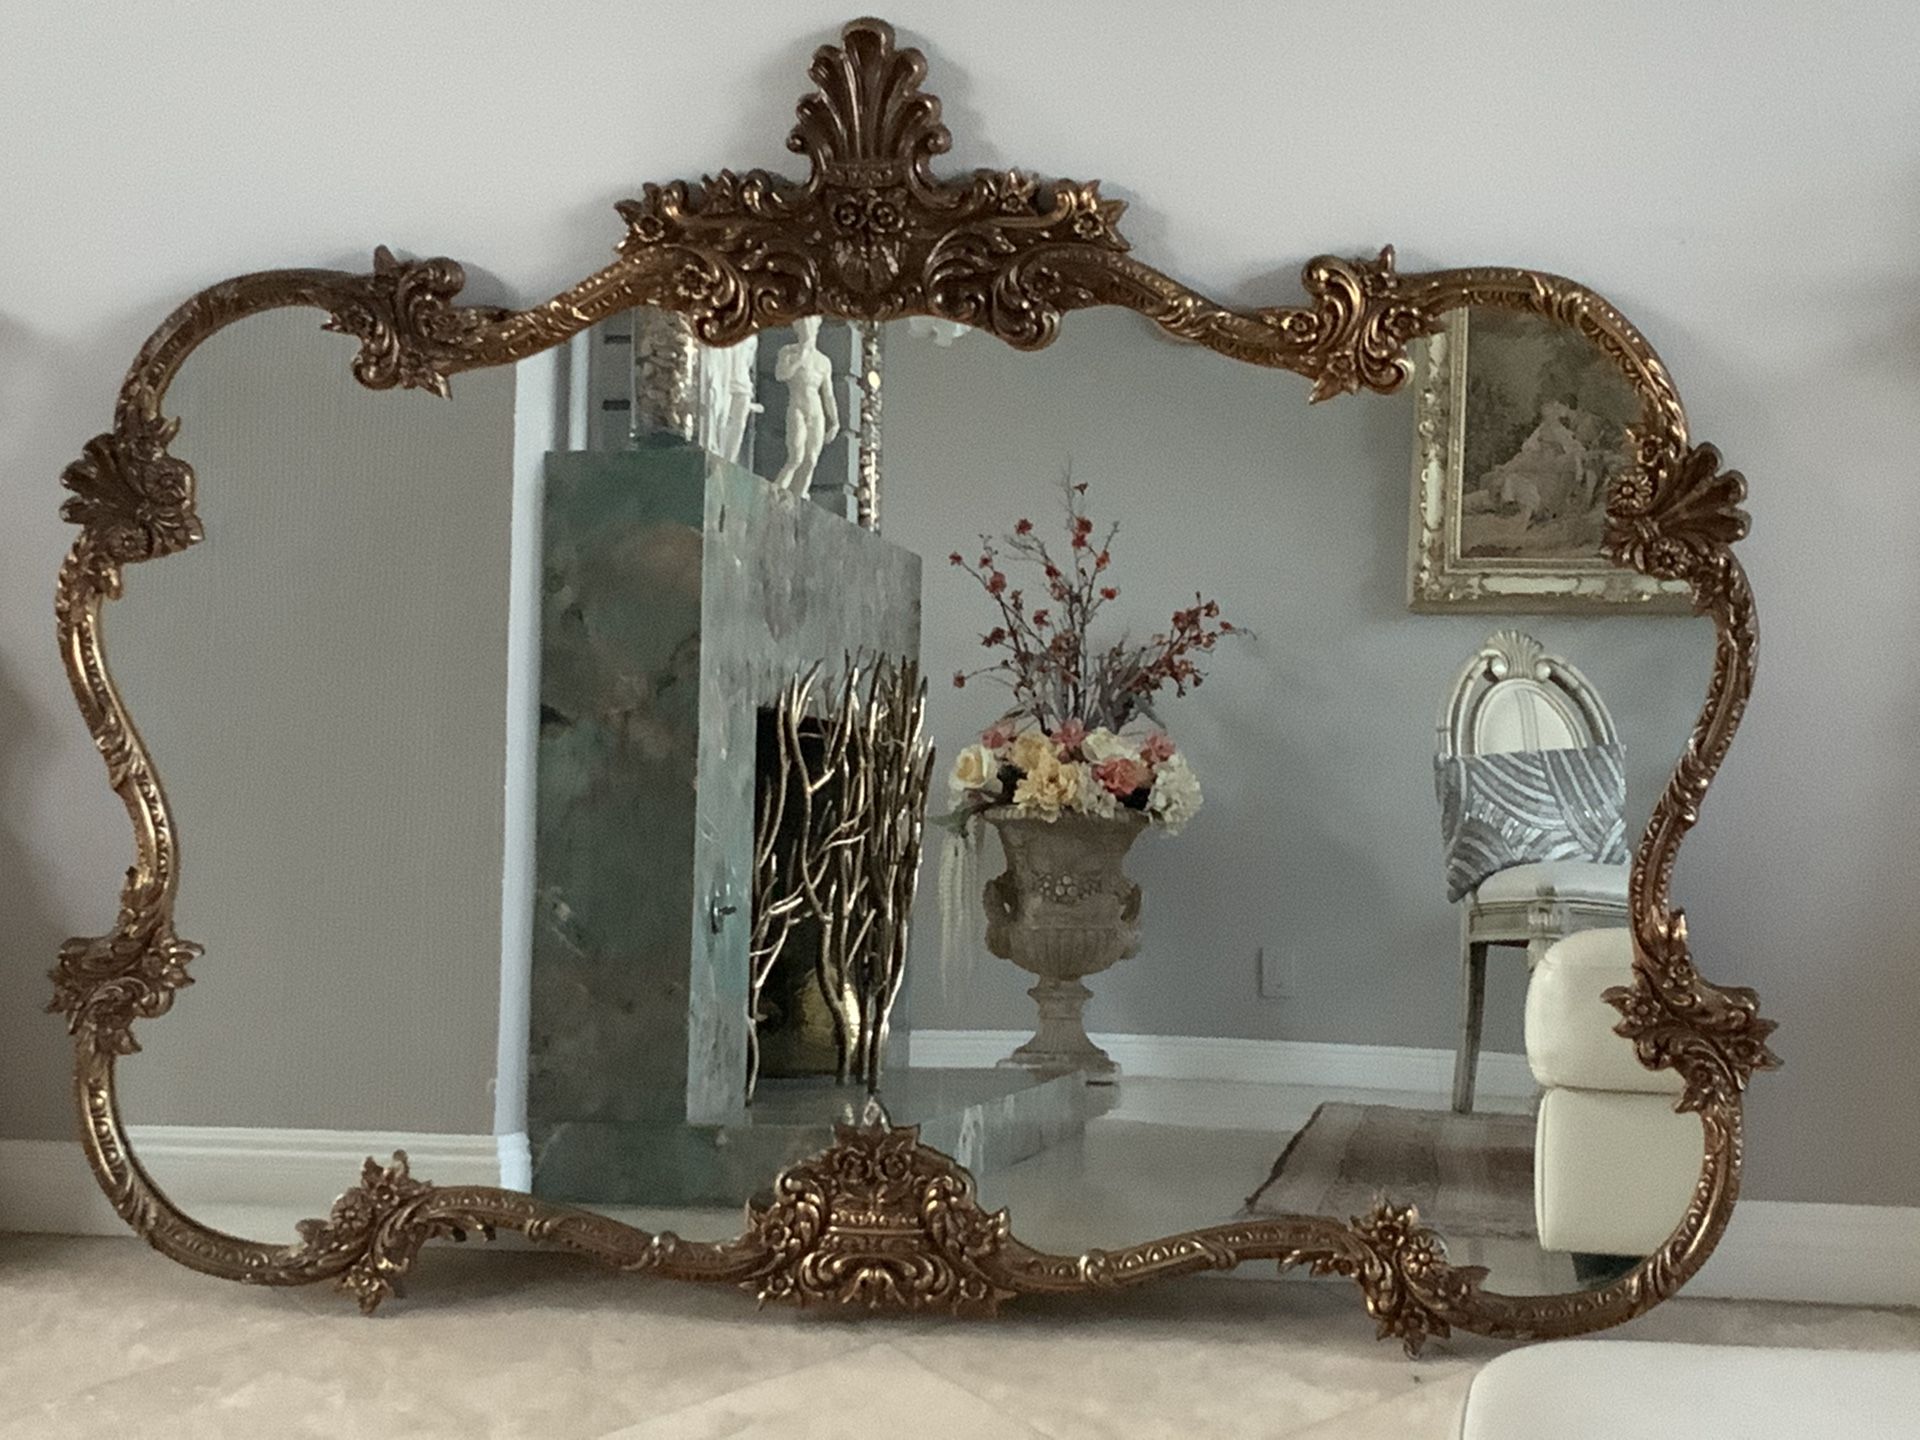 67”x50” huge antique mirror, frame is wood . This mirror is 95 yers old and is unique and characteristic. Must see ,is more beautiful in person